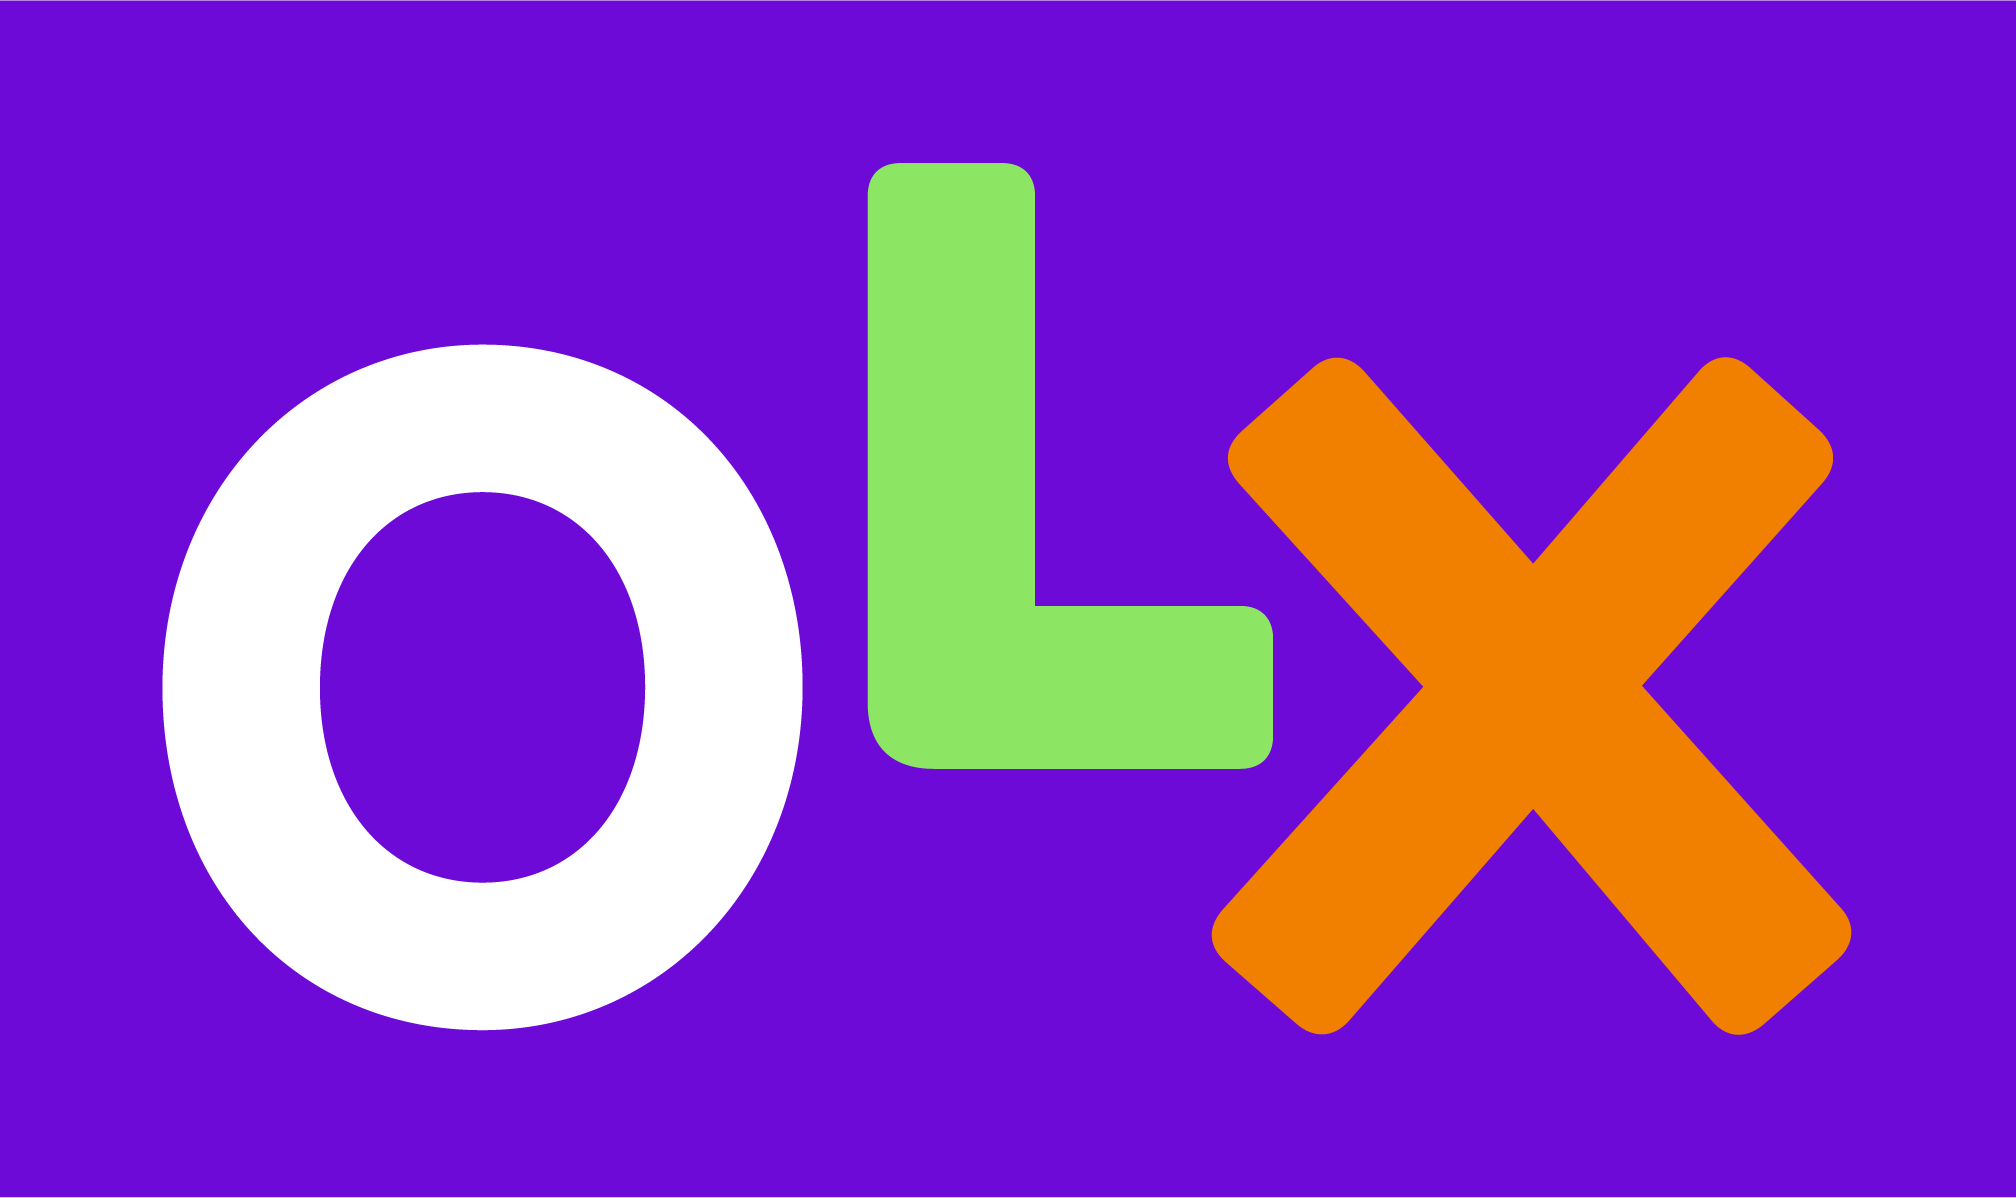  OLX  Brasil acquires 100 of Grupo ZAP shares for 640M 